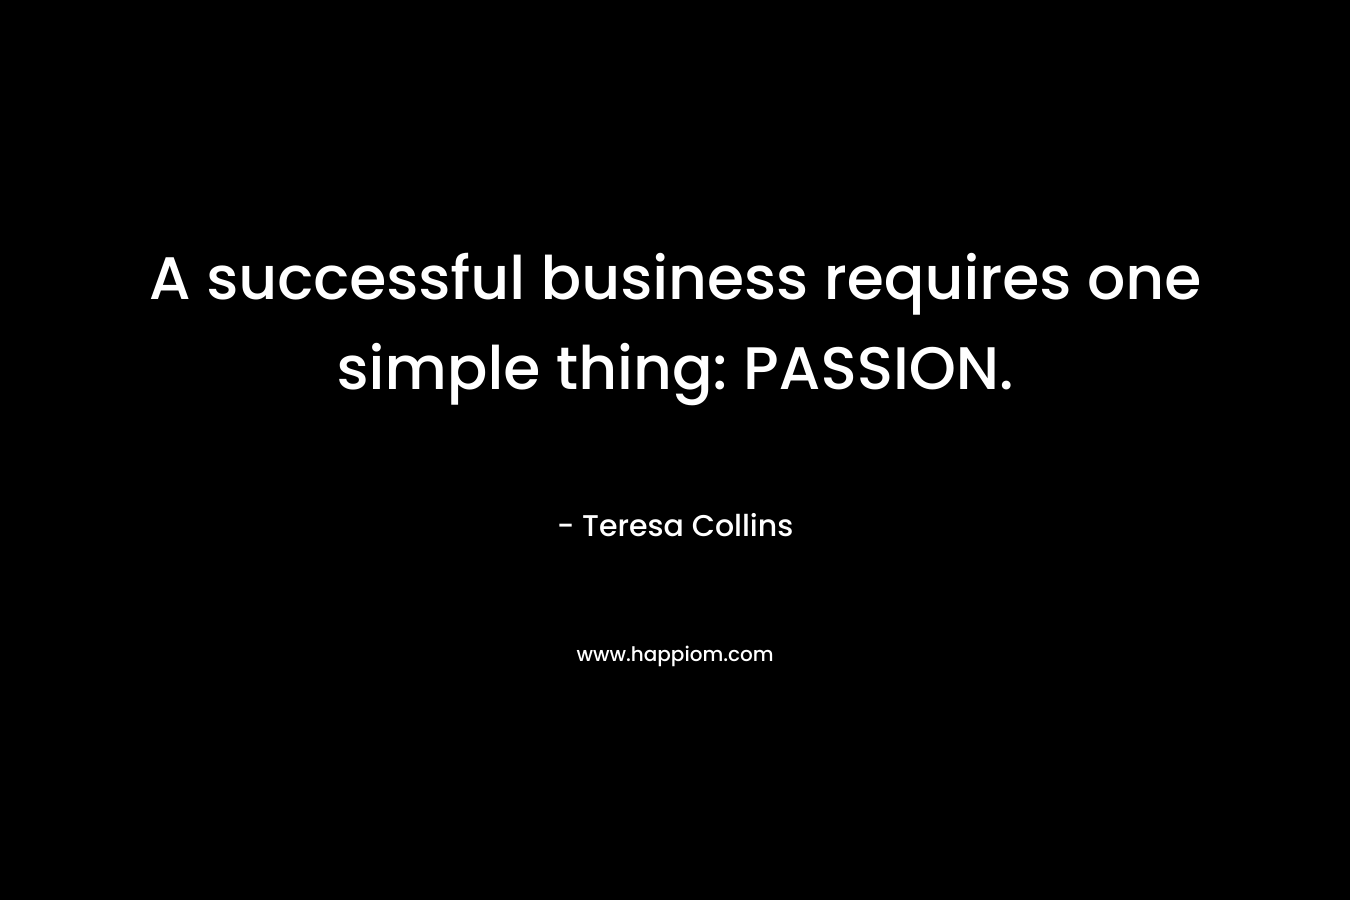 A successful business requires one simple thing: PASSION.